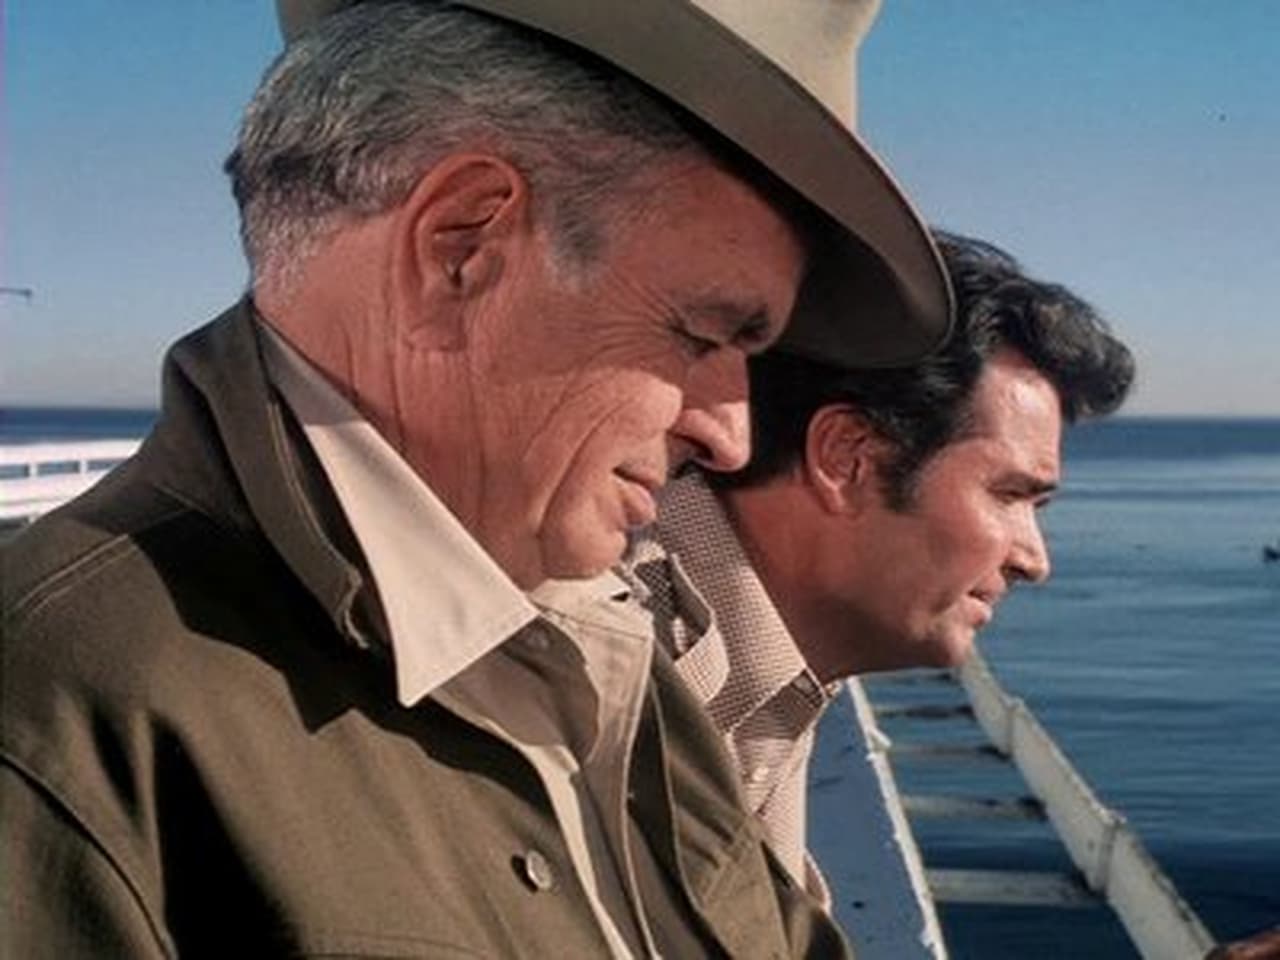 The Rockford Files - Season 2 Episode 22 : A Bad Deal in the Valley